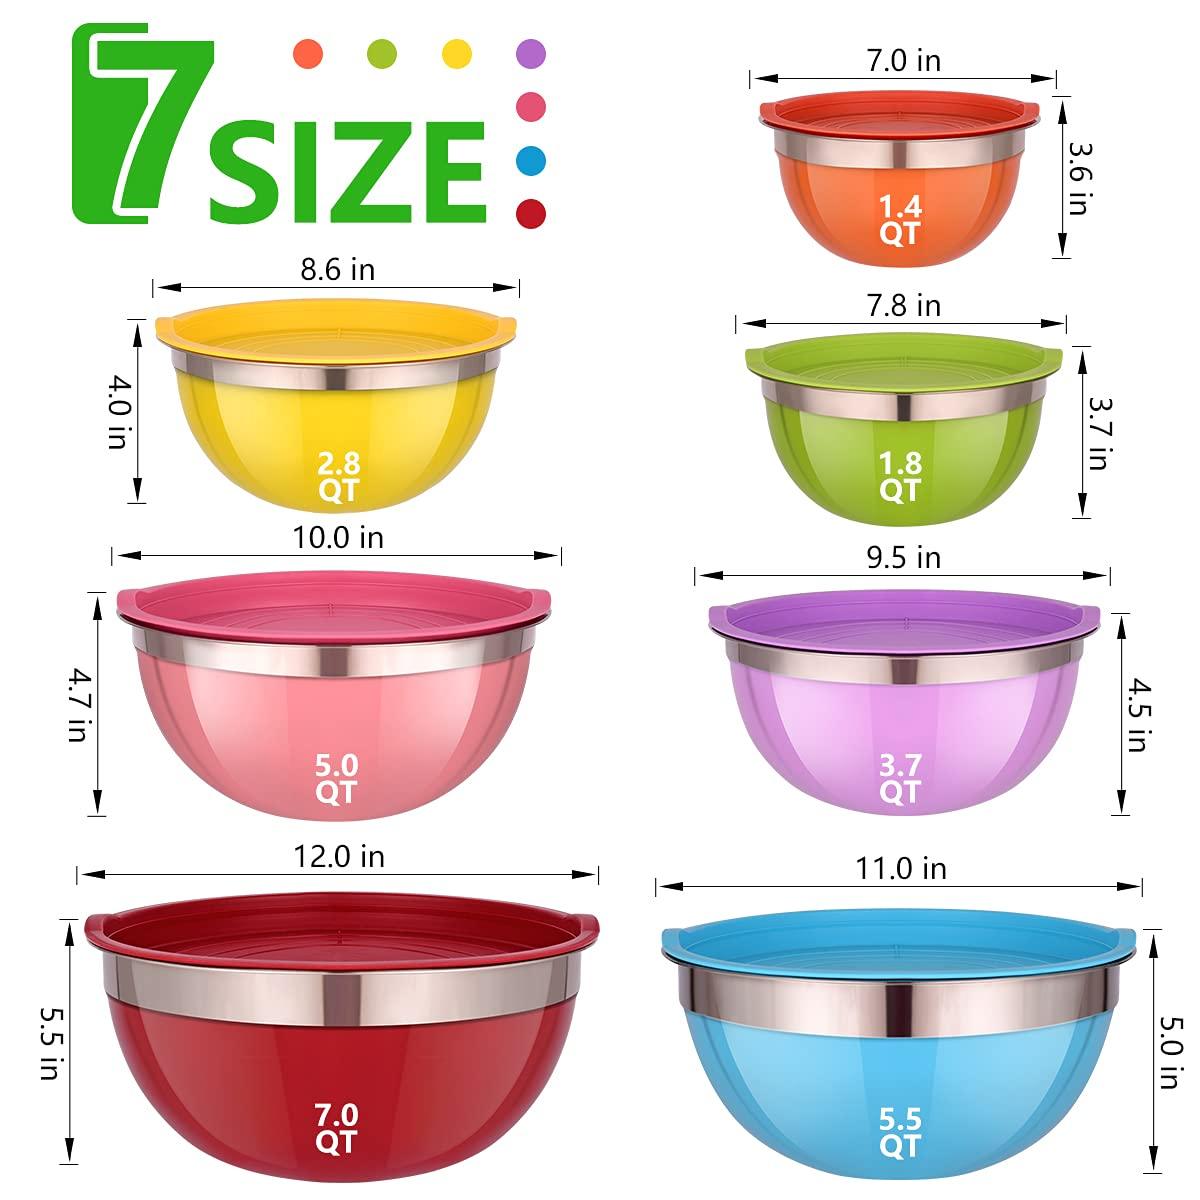 Mixing Bowls with Lids for Kitchen - 26 PCS Stainless Steel Nesting Colorful Mixing Bowls Set for Baking,Mixing,Serving & Prepping,Size 7, 5.5, 5, 4, 3, 2, 1.5QT,12 Cooking Utensils - CookCave